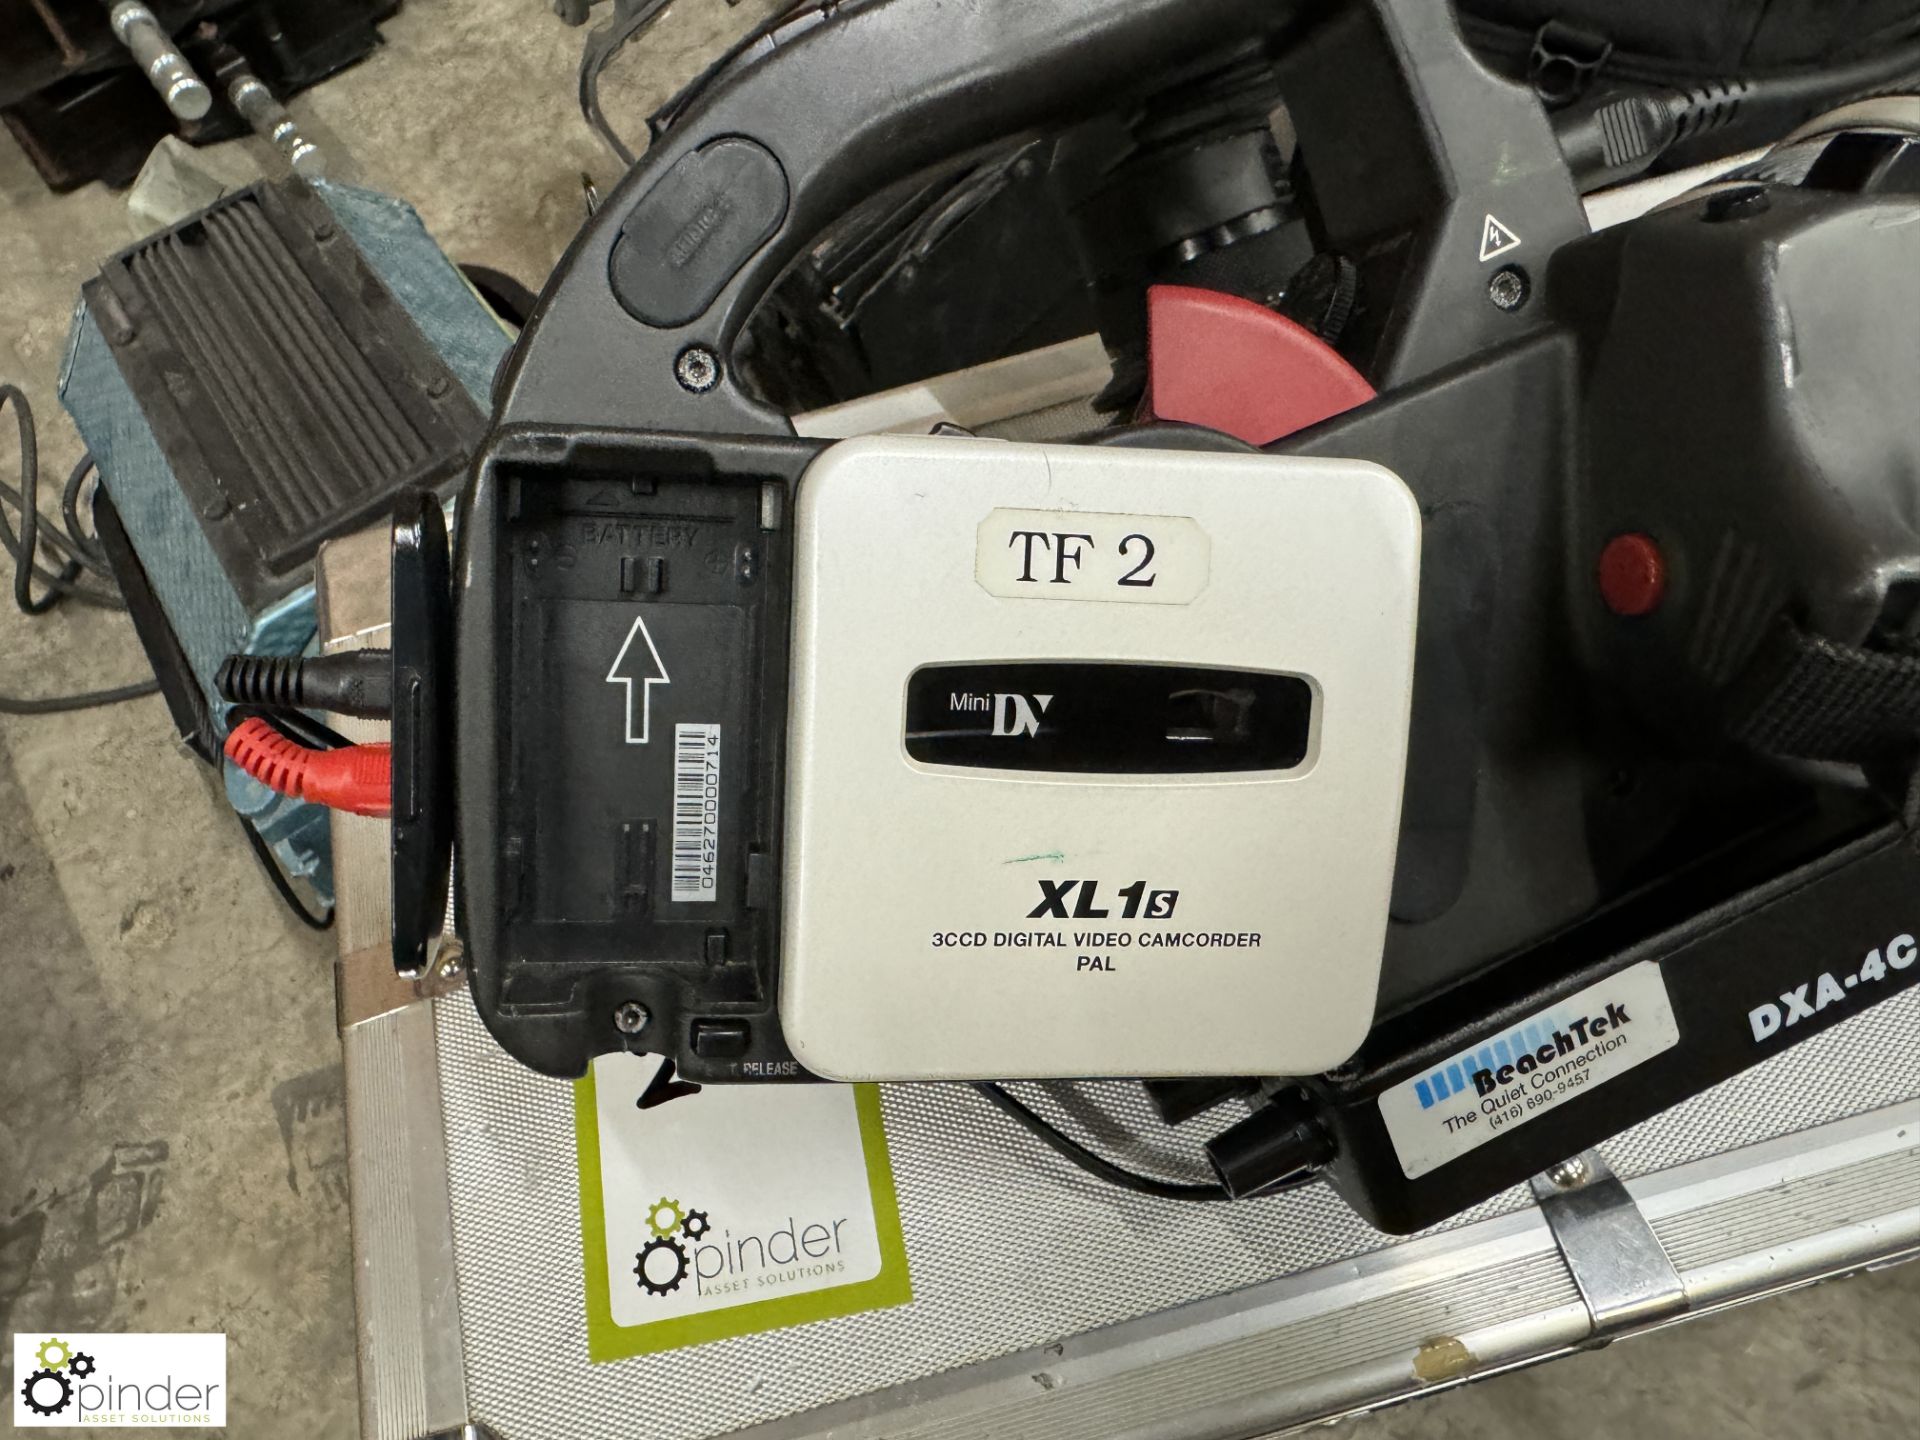 Canon DM-XL1 Digital Video Camcorder with flight case - Image 5 of 8